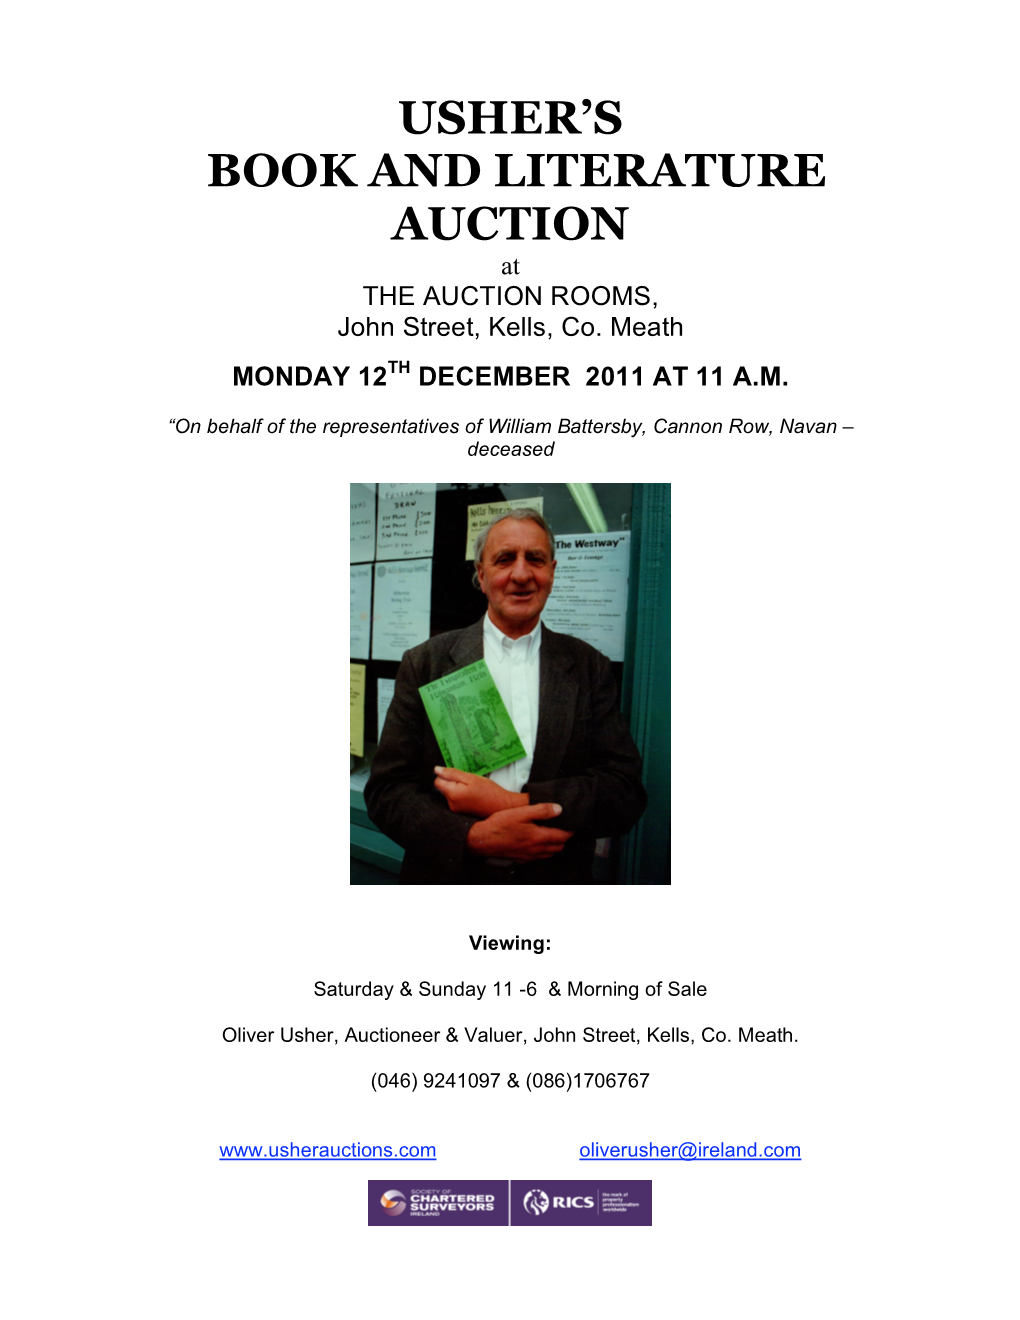 Usher's Book and Literature Auction